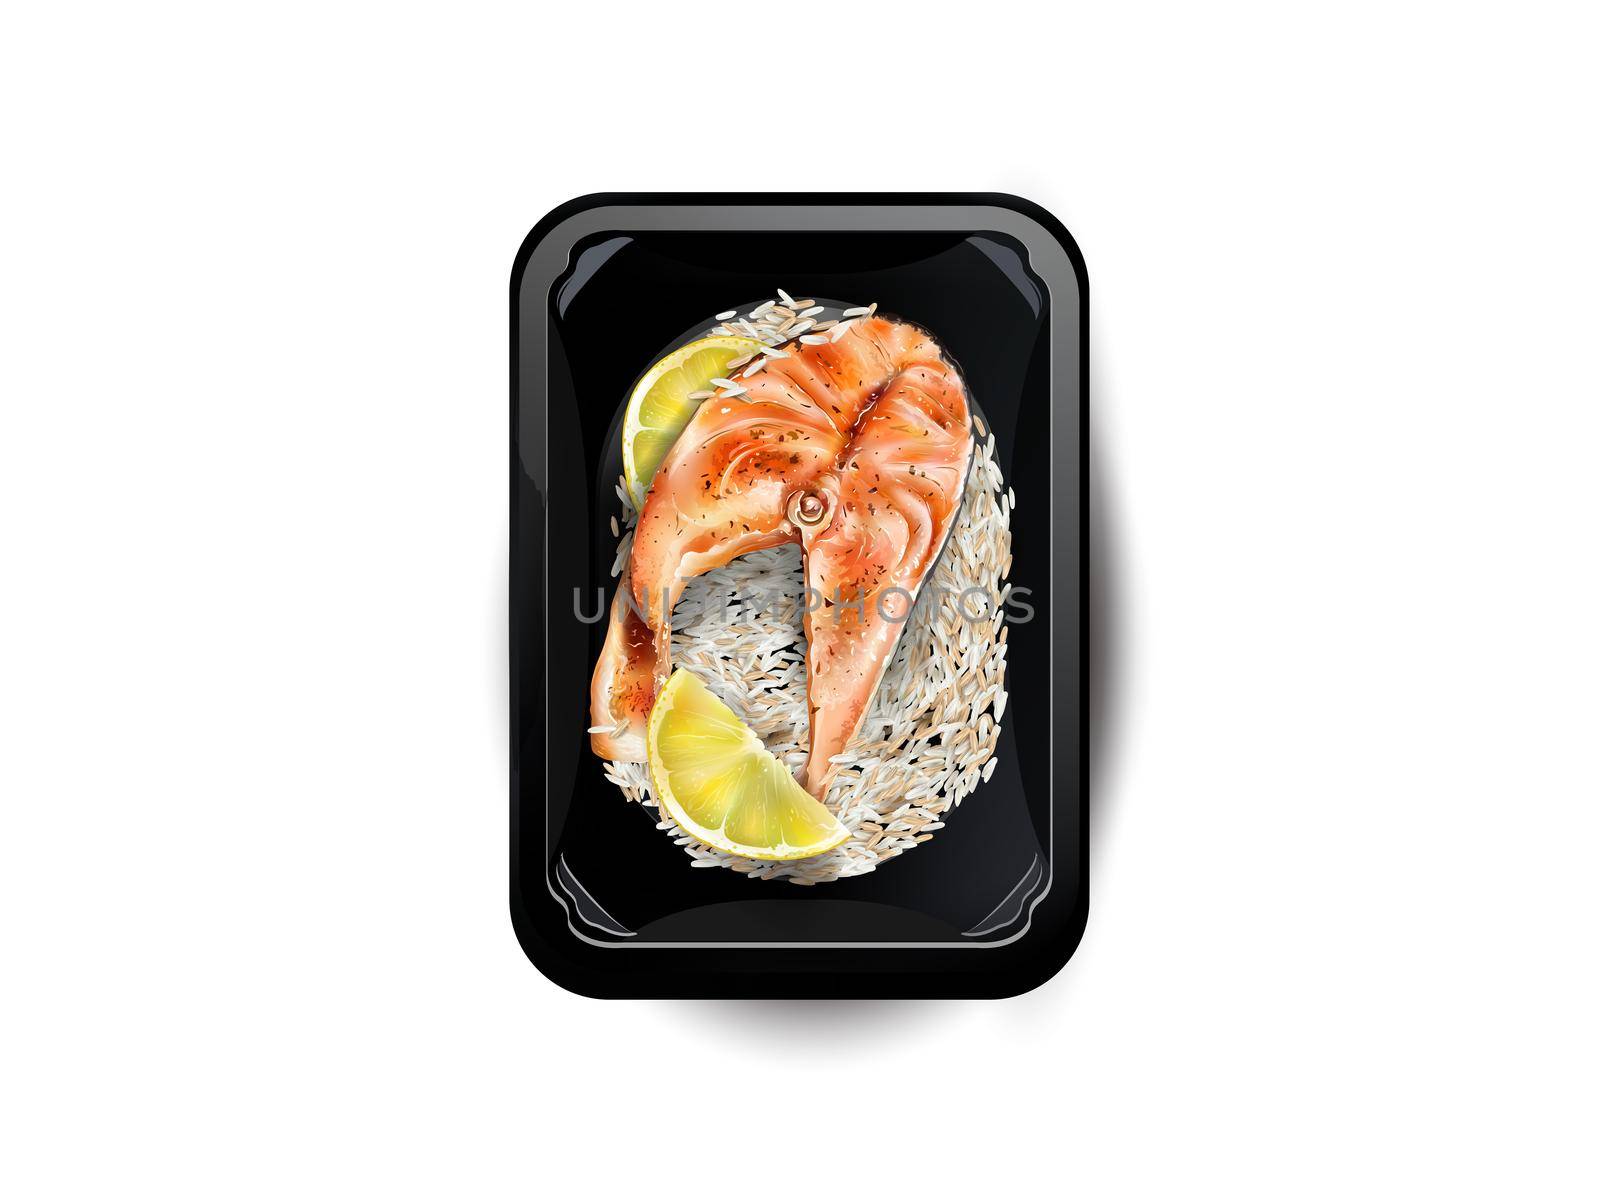 Salmon steak with long-grain rice and lemon slices in a lunchbox on a white background, top view. Realistic style illustration.